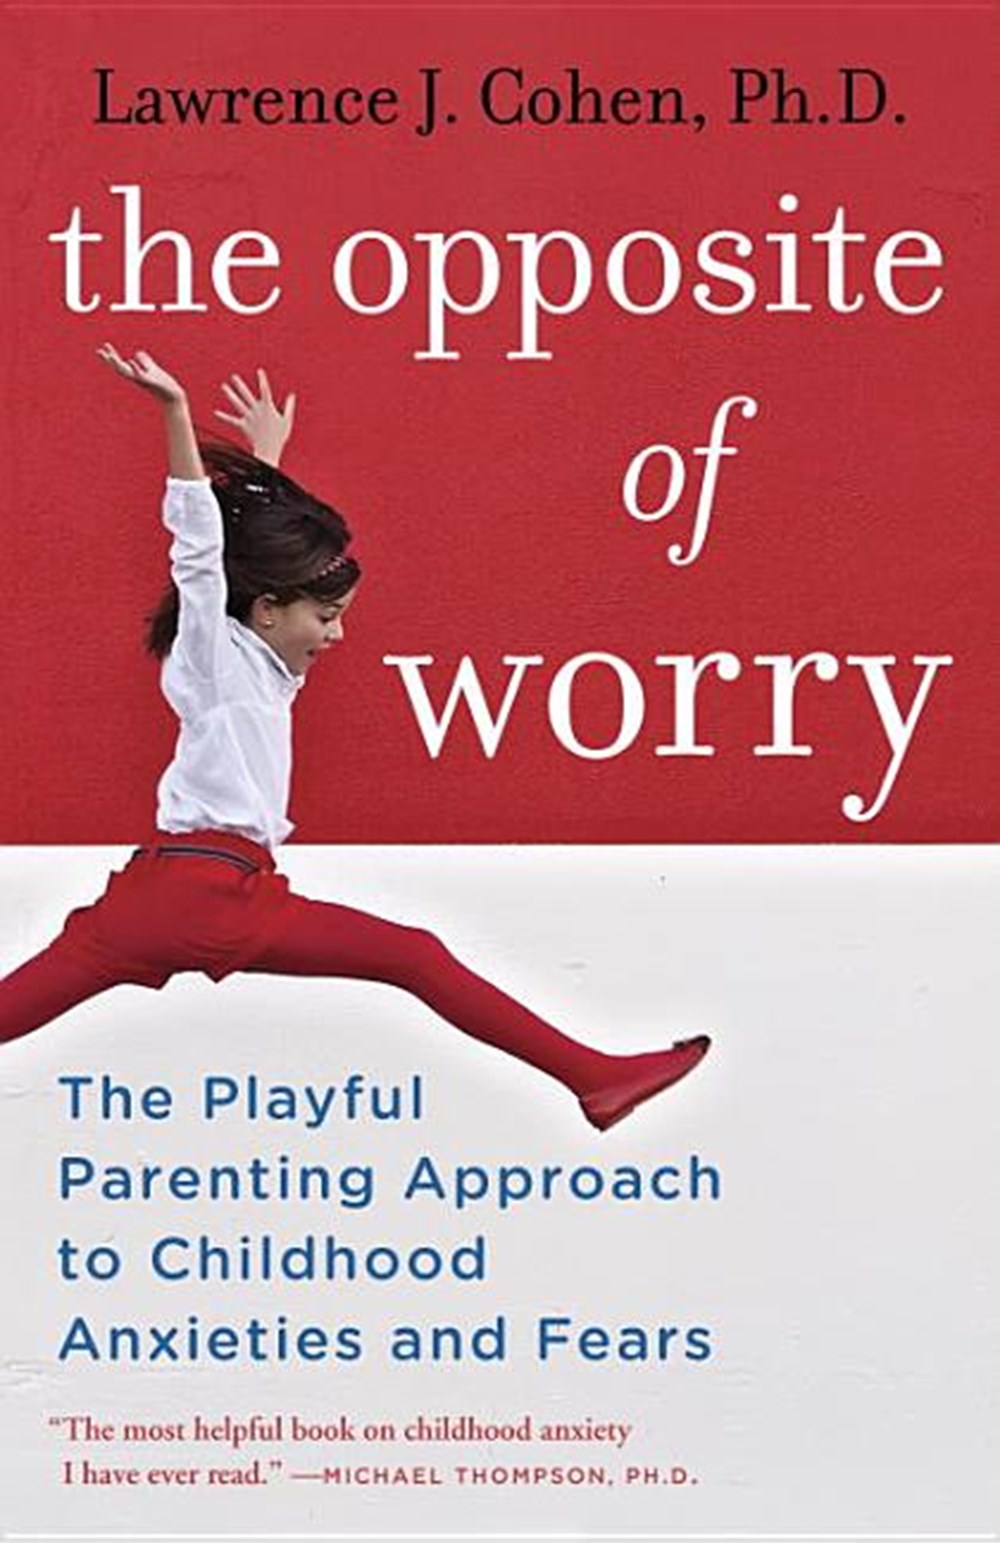 Opposite of Worry: The Playful Parenting Approach to Childhood Anxieties and Fears